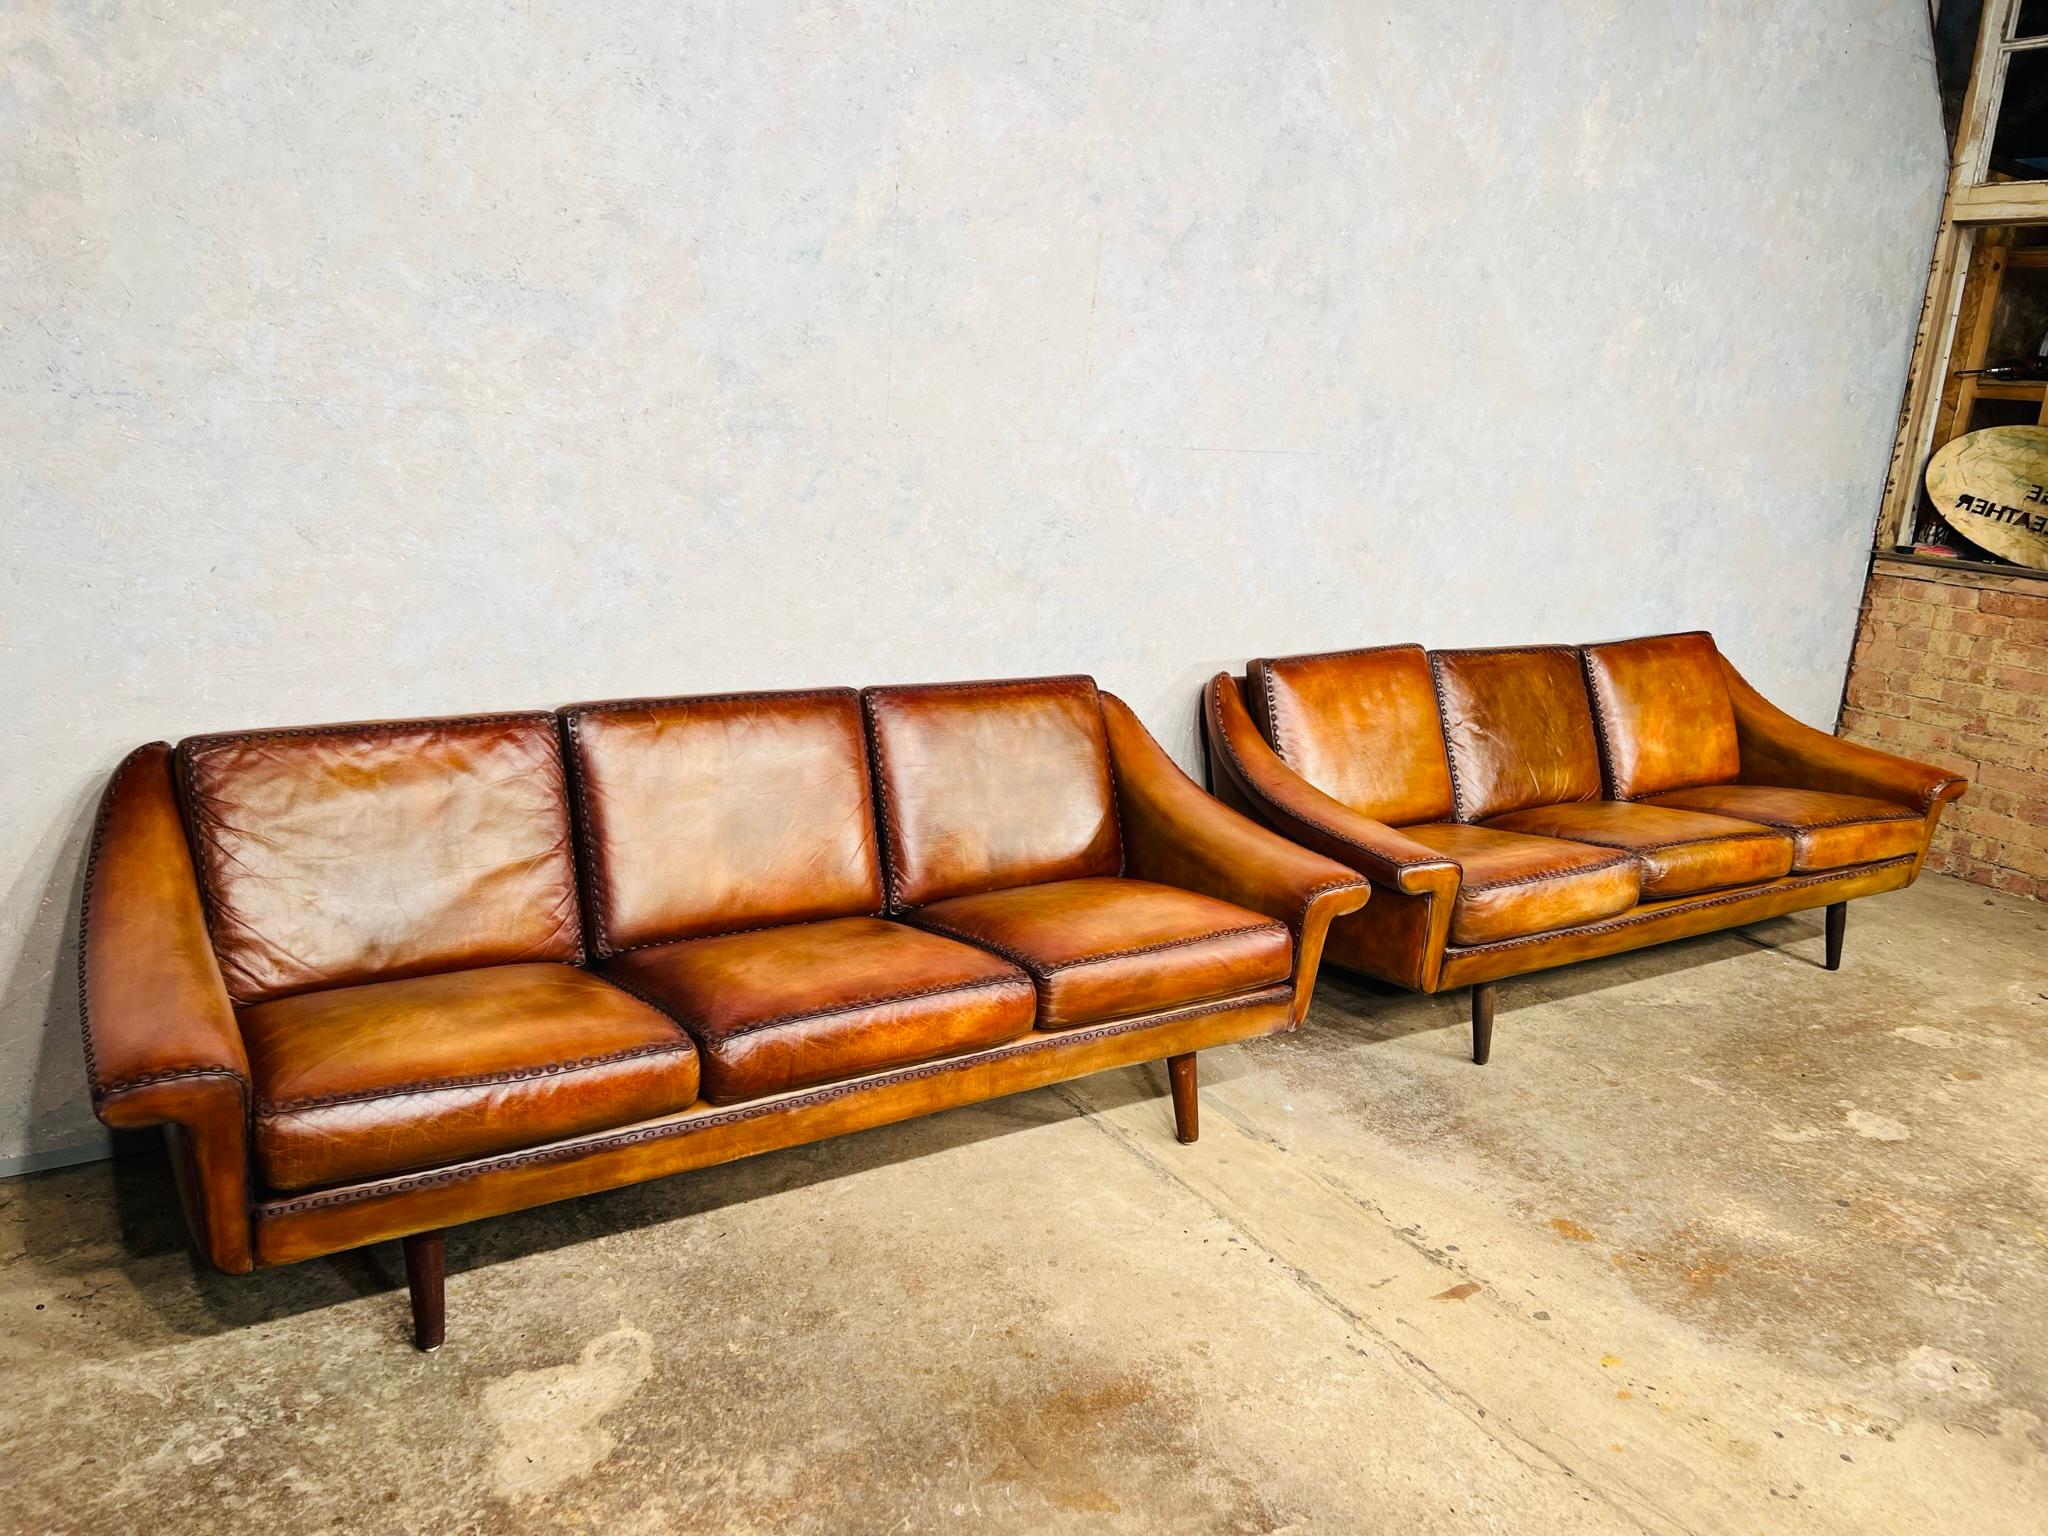 A Pair of Matador Sofas by Aage Christiansen for Eran dating 1960s.

Great to find a matching pair, the colour and patina on these is exceptional.

A great design and shape, Aage Christiansen took the inspiration from a Matadors hat, the quality and